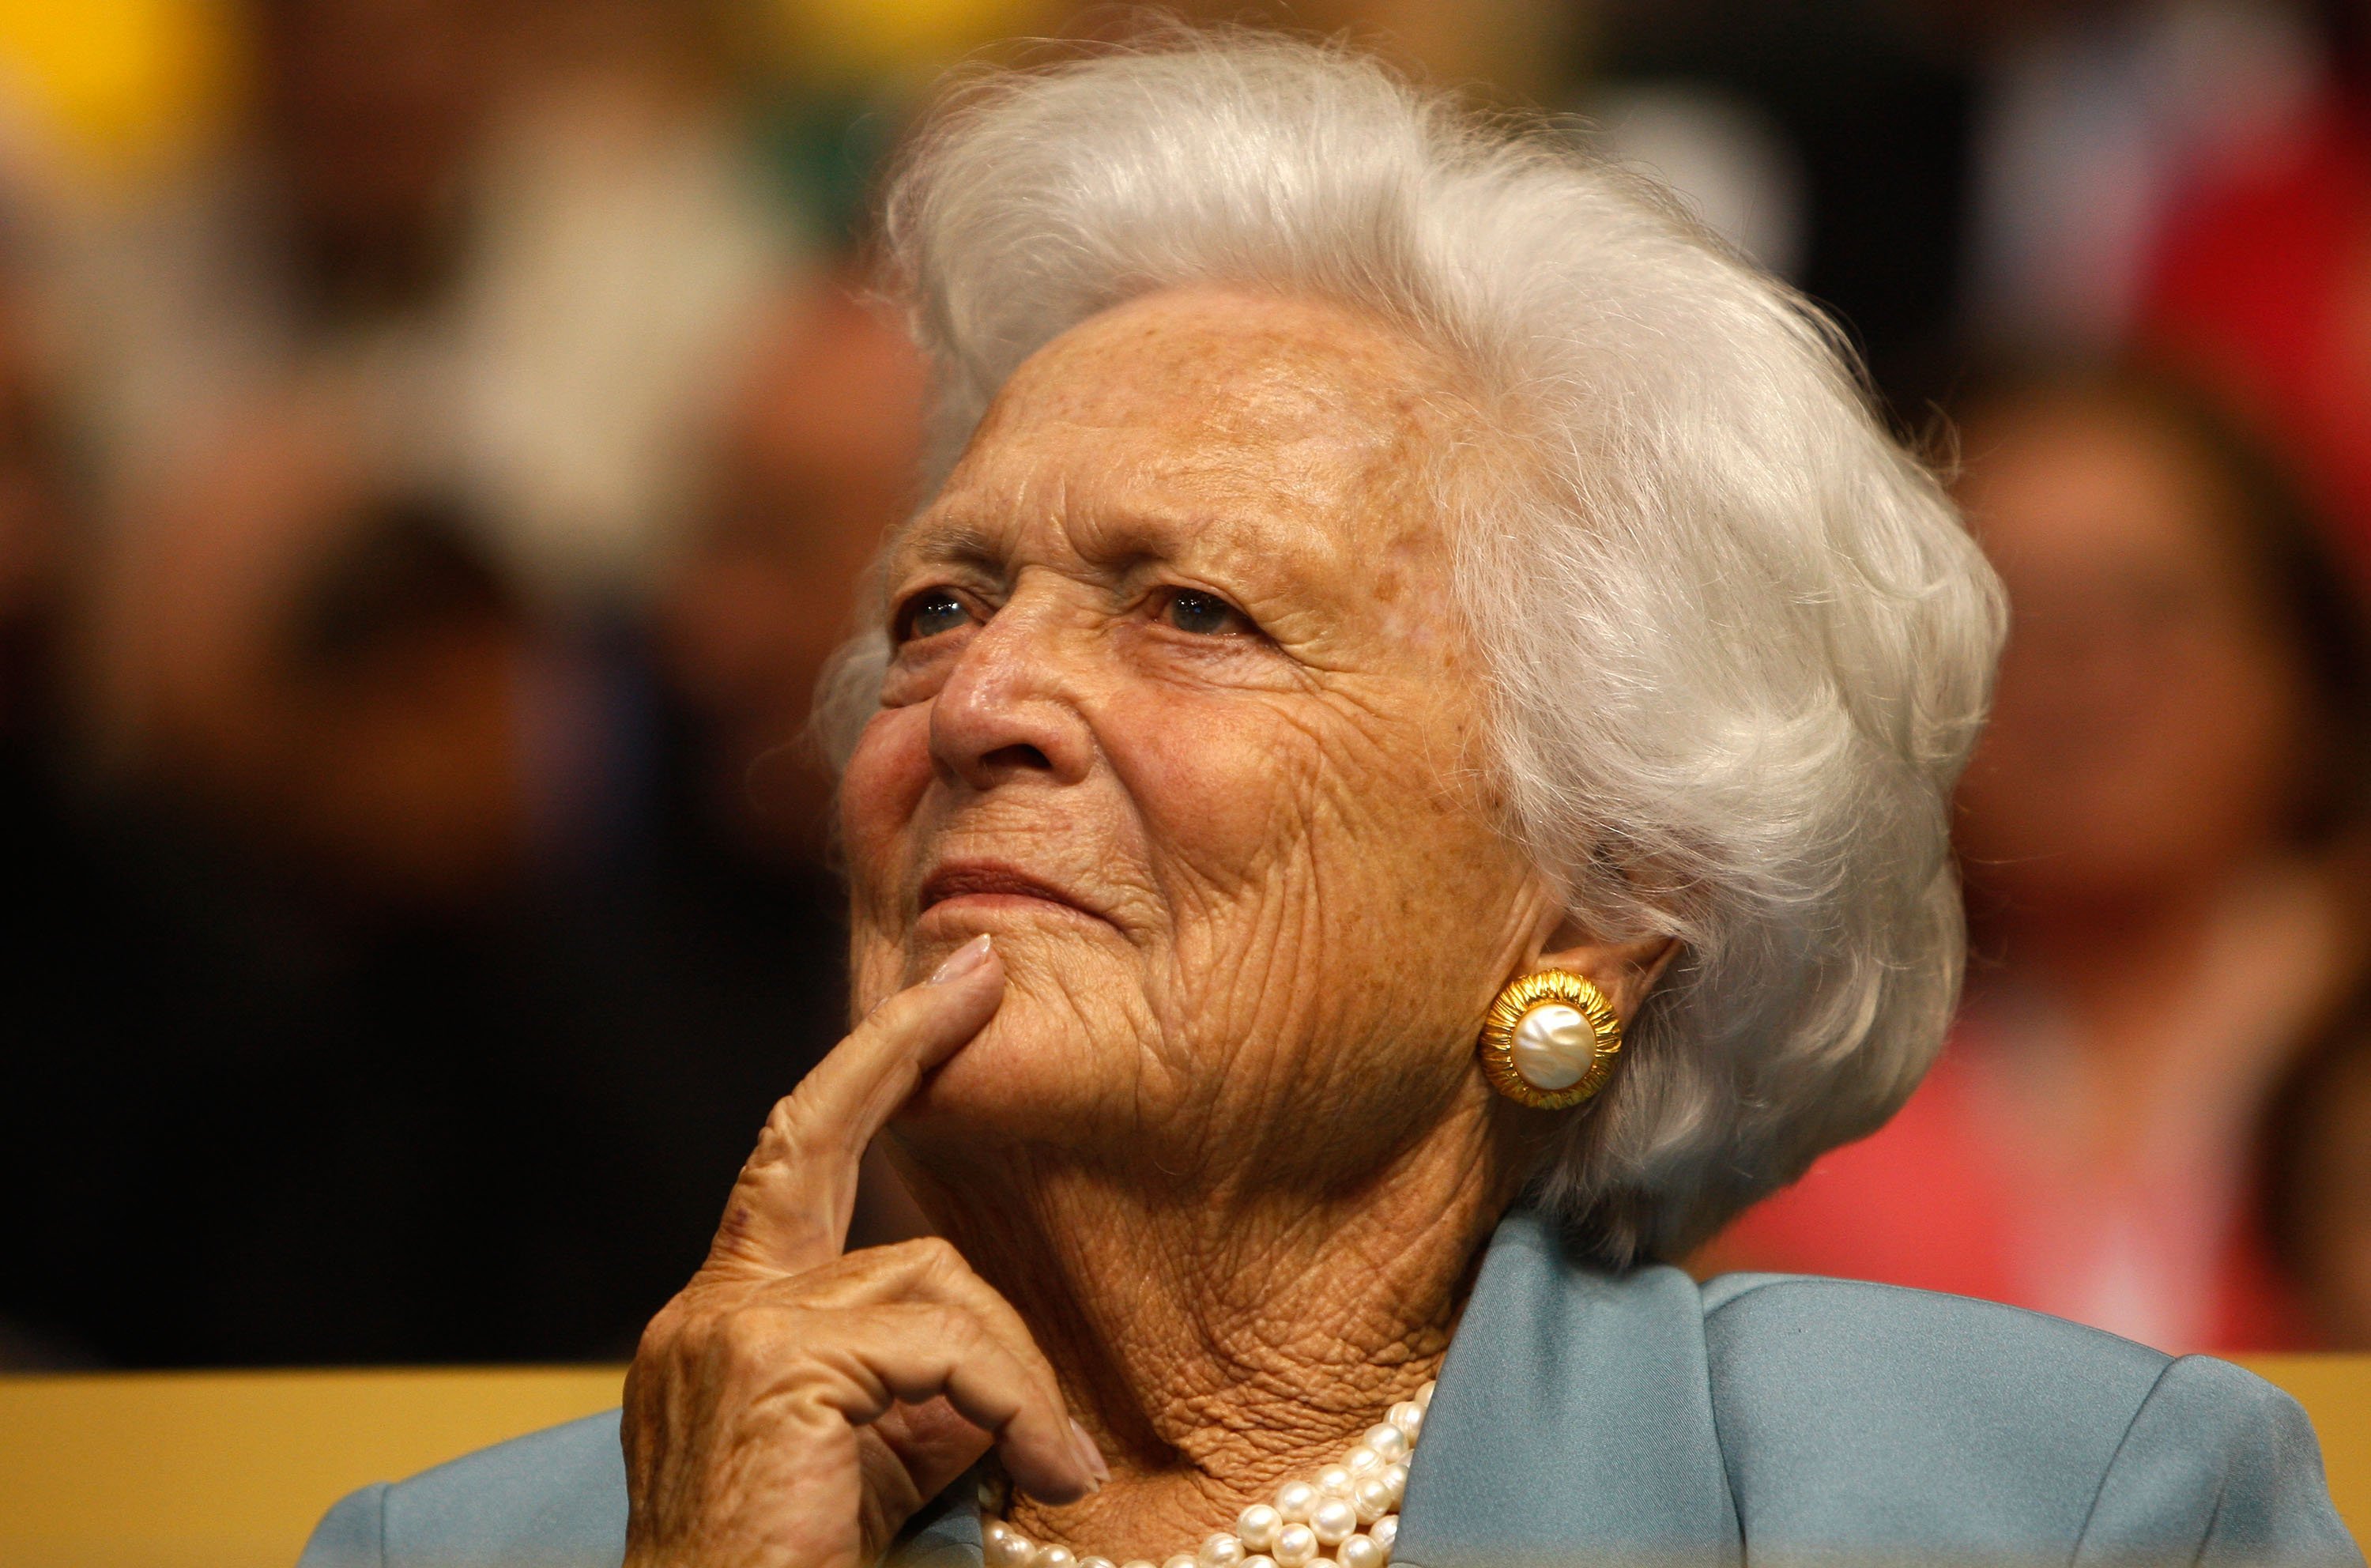 Barbara Bush at the Republican National Convention in St. Paul, Minnesota | Photo: Getty Images